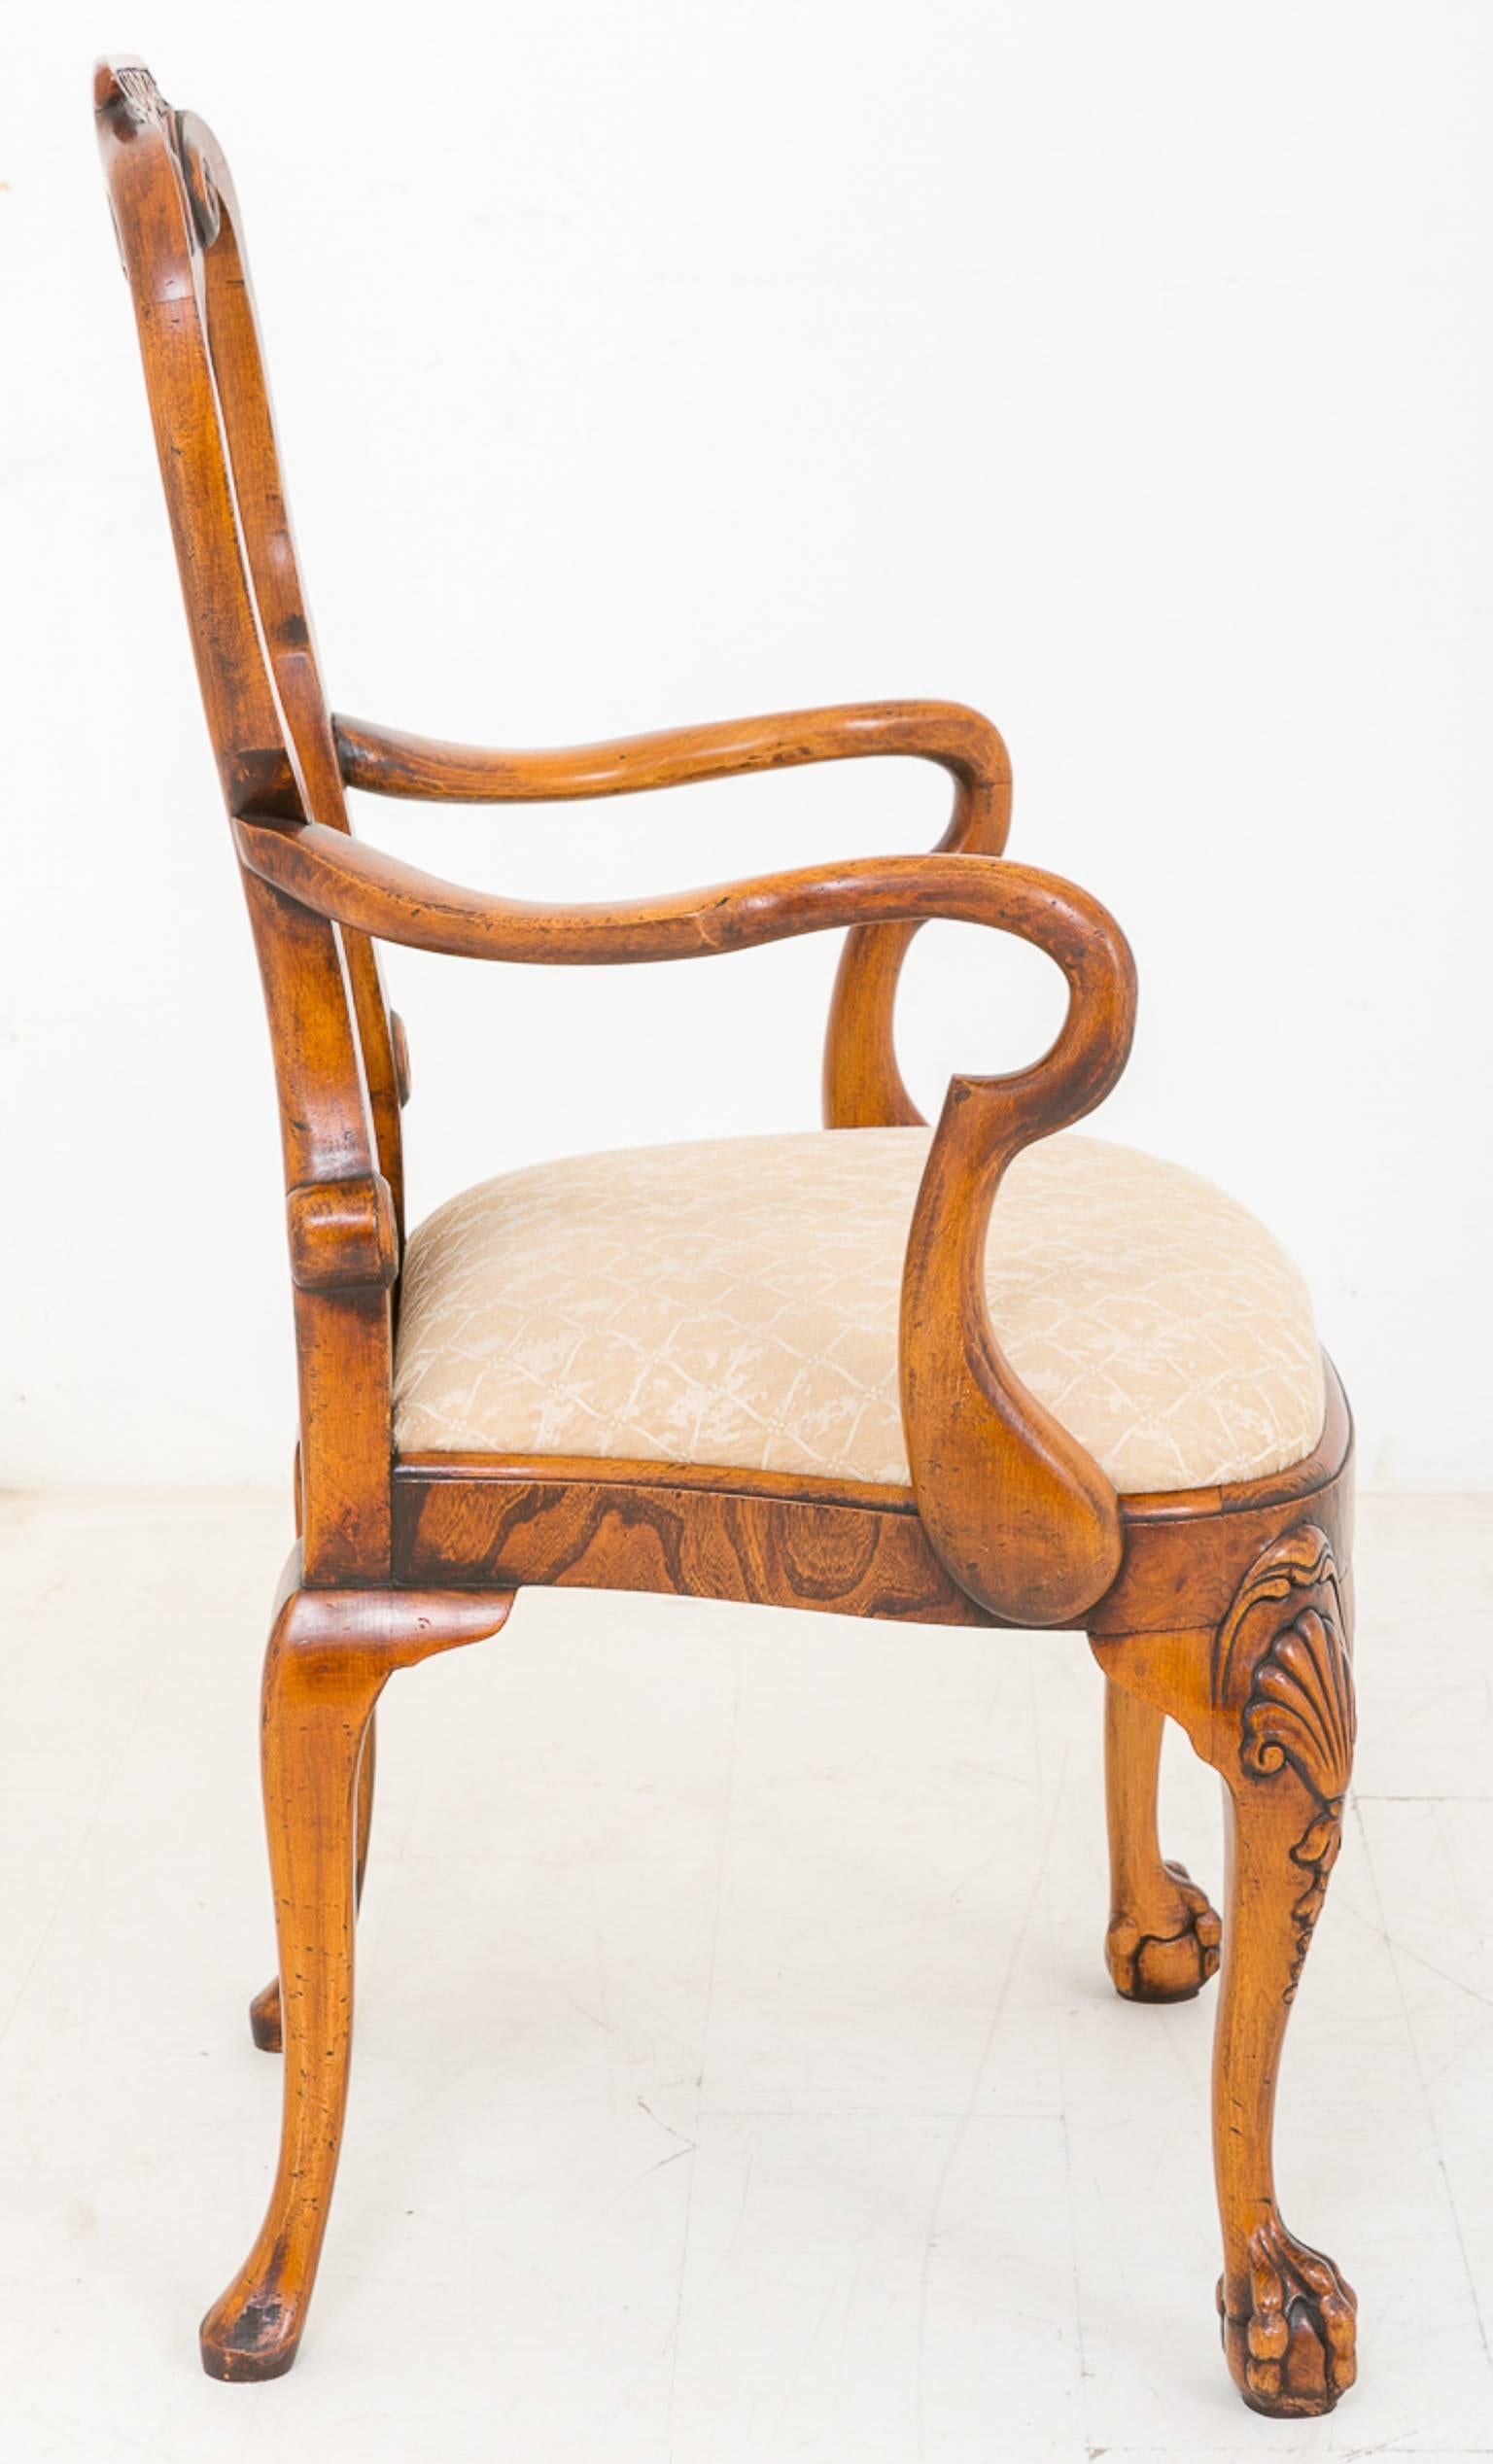 Superb set of 14 (12 and two) Queen Anne style burr elm chairs. Standing on a swept leg with a ball and claw foot with a carved shell to the knees.
The shaped seats having recently been upholstered.
The back splat being typical of early 18th